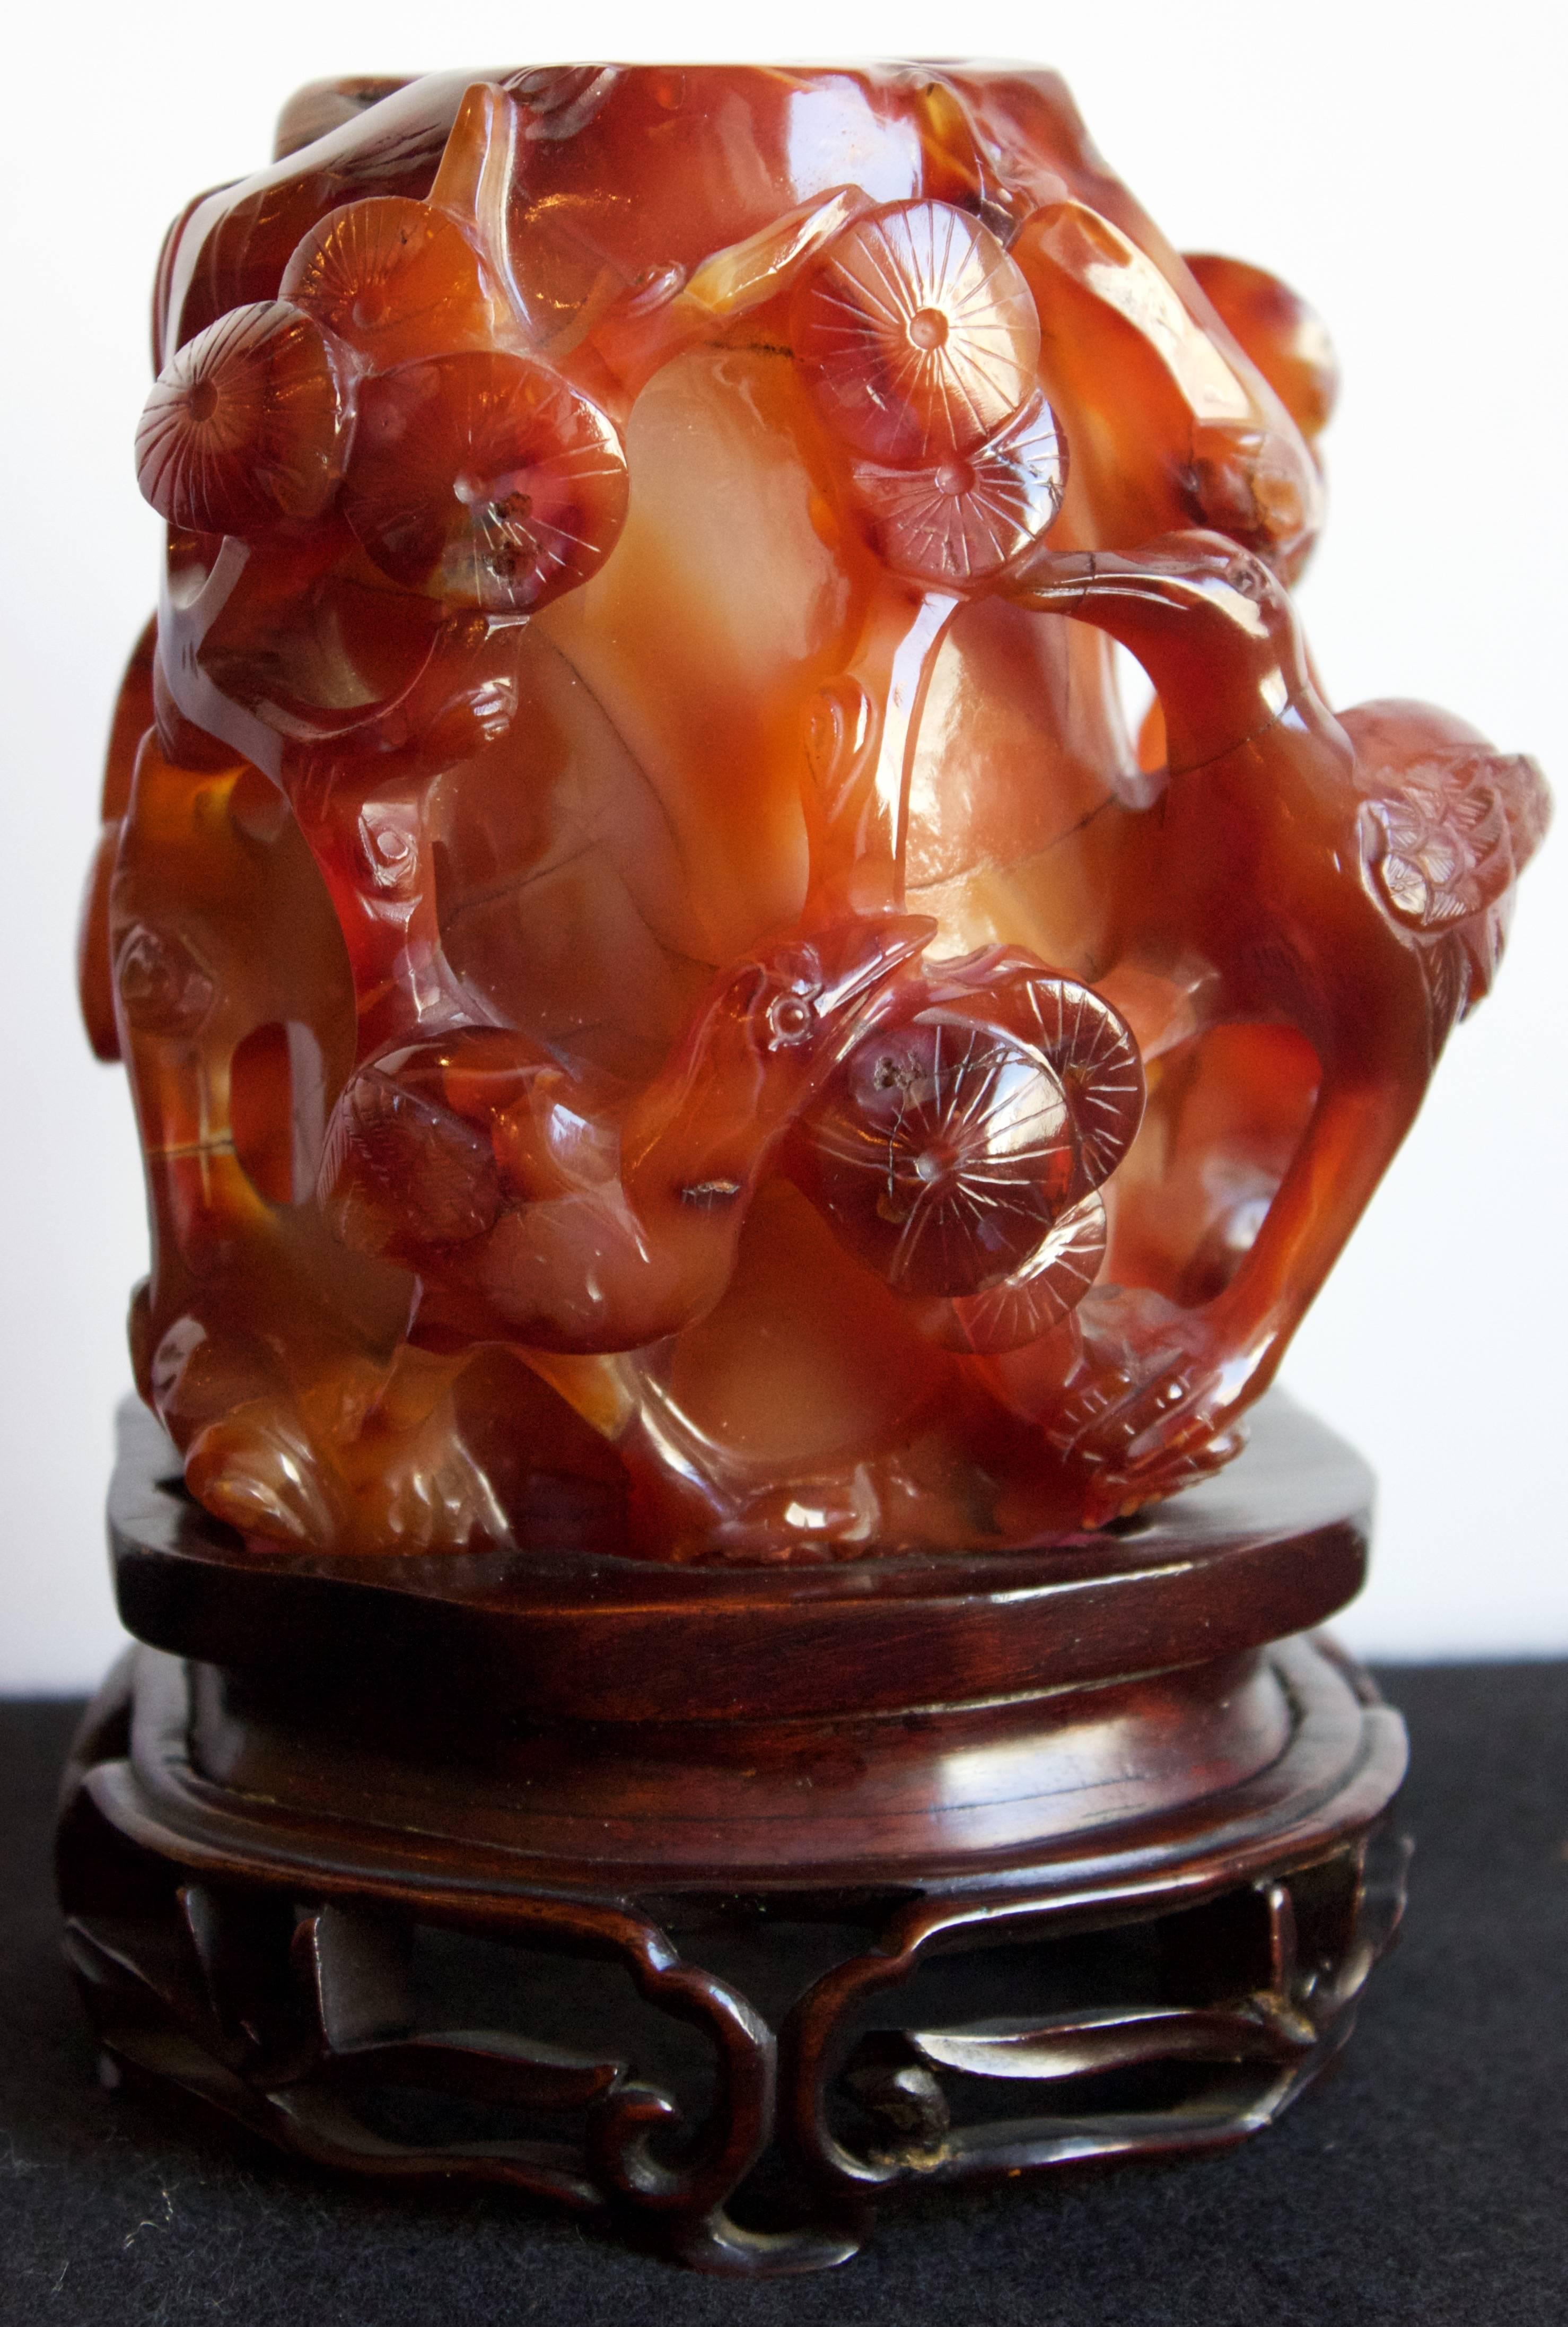 This hand-carved brush pot has a deep cylinder well in its center as a container fot calligraphy brushes in a scholar's studio. Entirely made of red orange Carnelian agate (considered as the energy of blood) it is decorated with carved cranes and